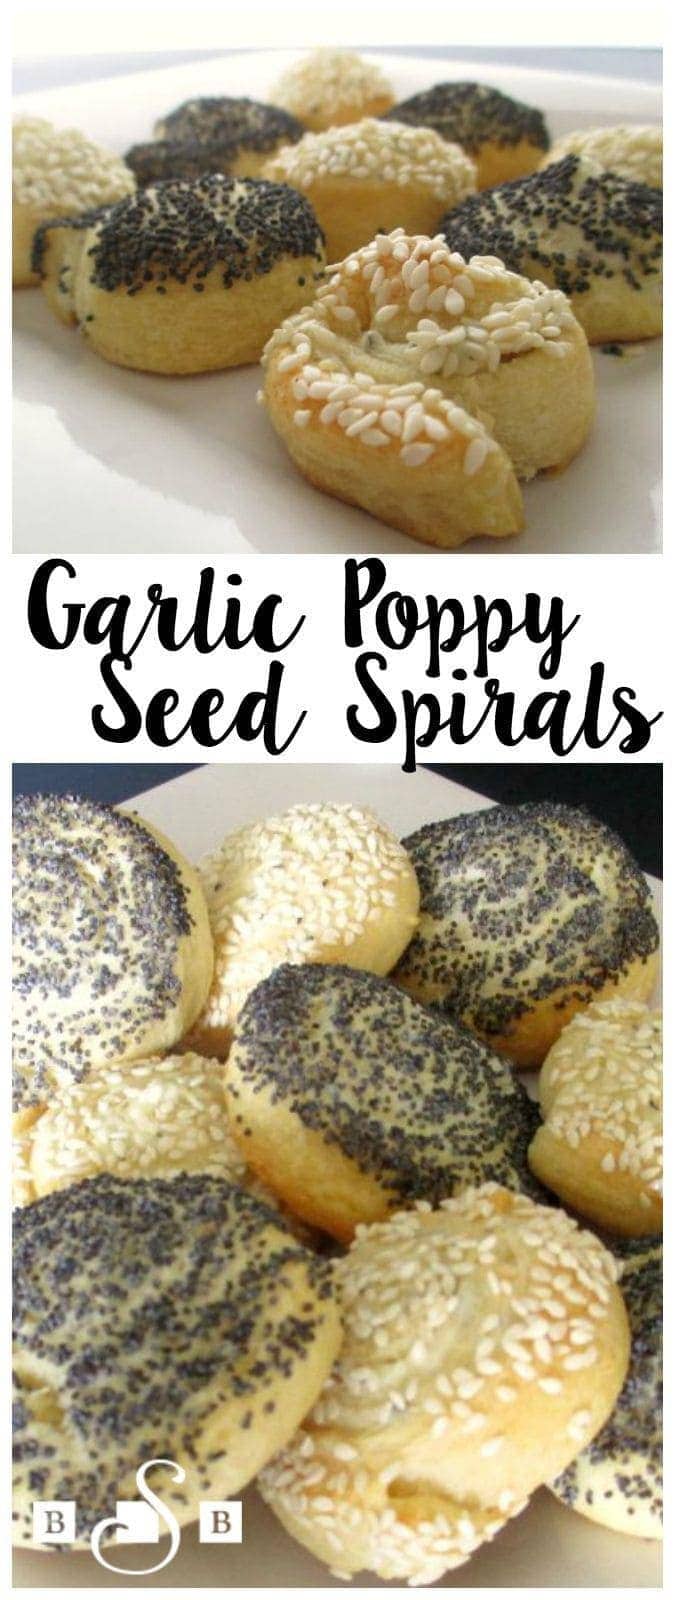 Flaky crescent dough, smooth cream cheese, and the aroma of garlic…your mouth is watering and you want to eat all the appetizers before your guests arrive. This is the glory of the garlic poppy seed spiral. In two bites this little finger food is gone. It is best to serve them fresh out of the oven, but if they cool off they are still the perfect appetizer.